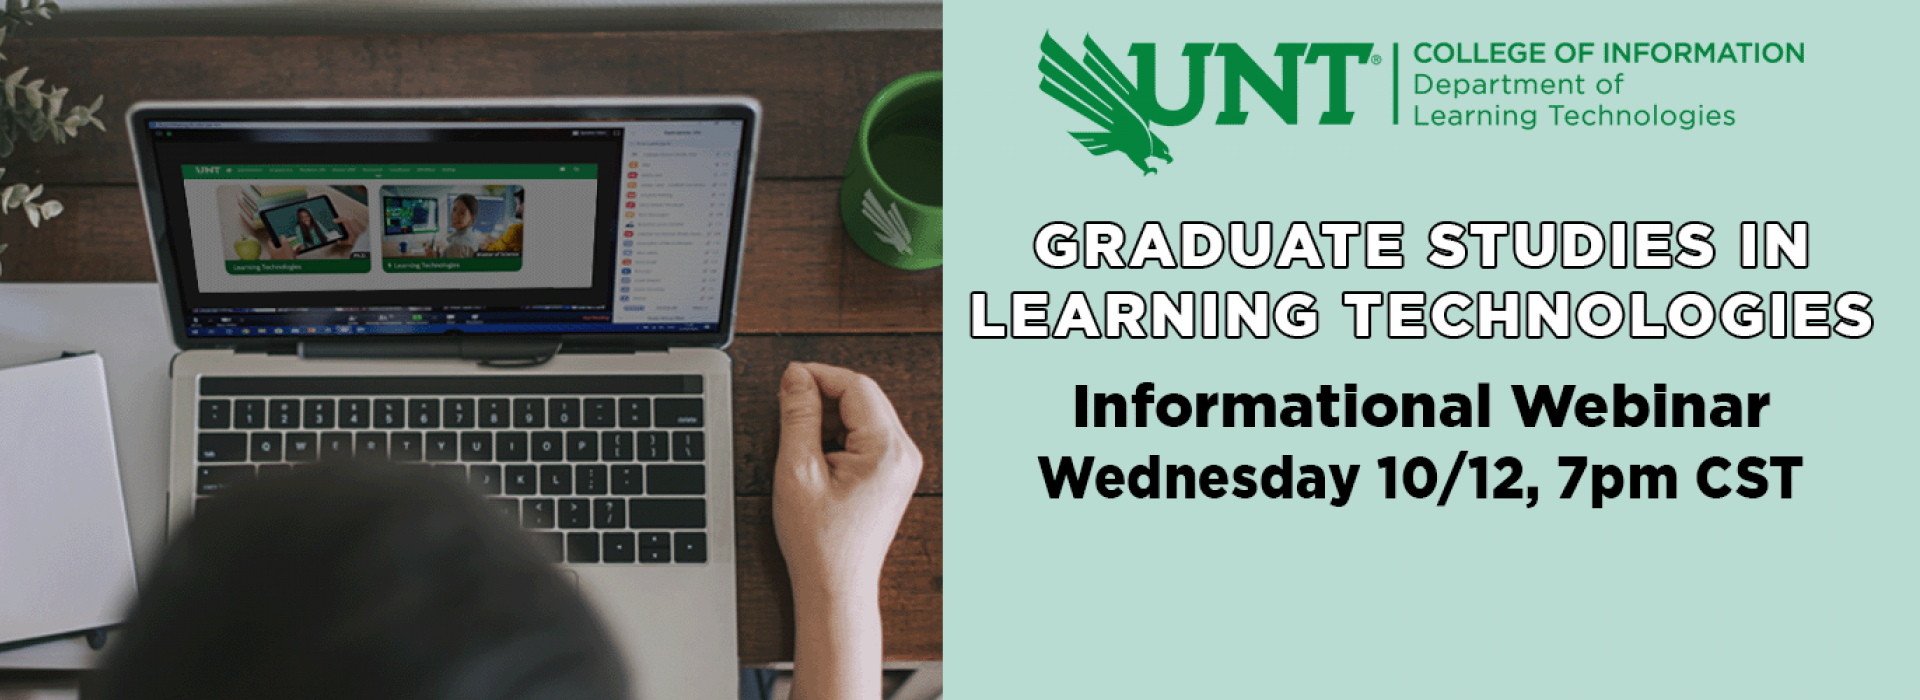 College of information Graduate Studies in Learning Technologies Webinar Oct 12 7pm